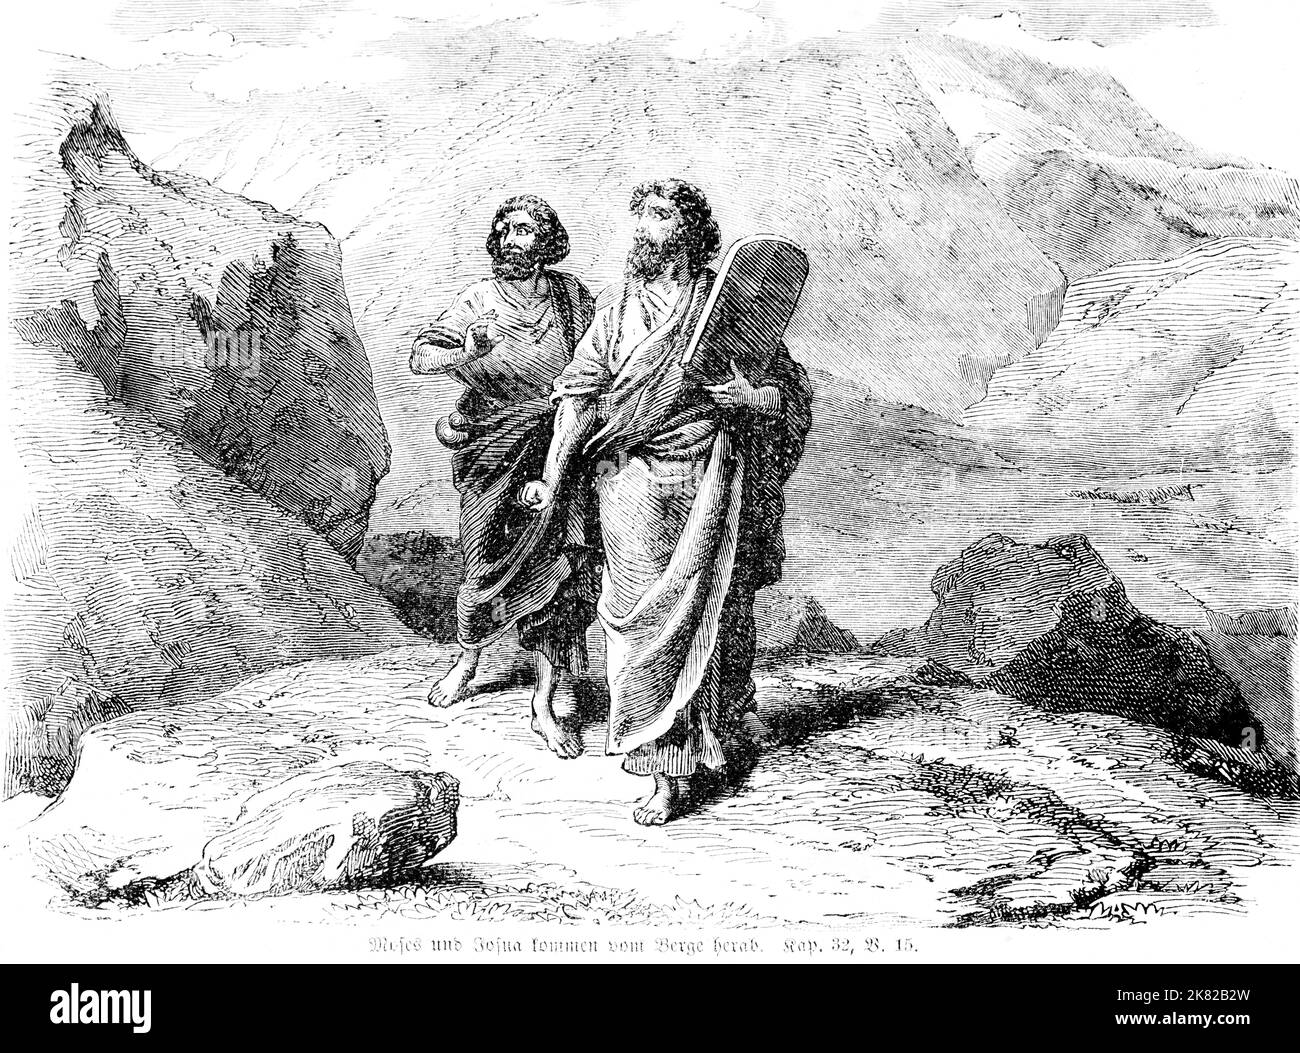 Moses and Joshua descending the mountain, Bible, Old Testament, Second Book of Moses, Genesis, Chapter 32, Verse 15, historical Illustration 1850 Stock Photo